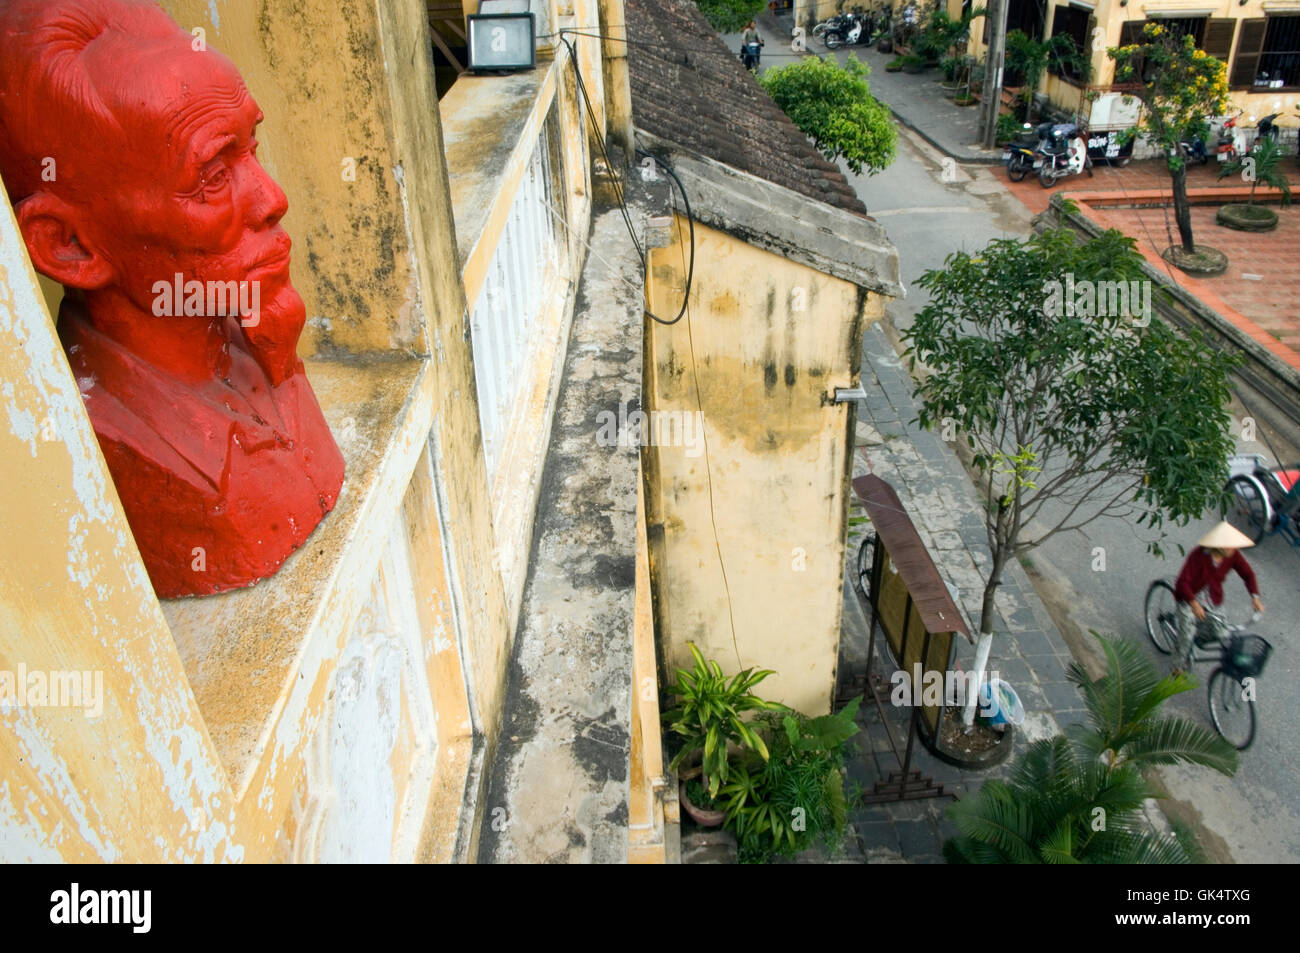 22 Mar 2007, Hoi An, Vietnam --- Sculpture Bust of Ho Chi Minh Overlooking Street --- Image by © Jeremy Horner Stock Photo